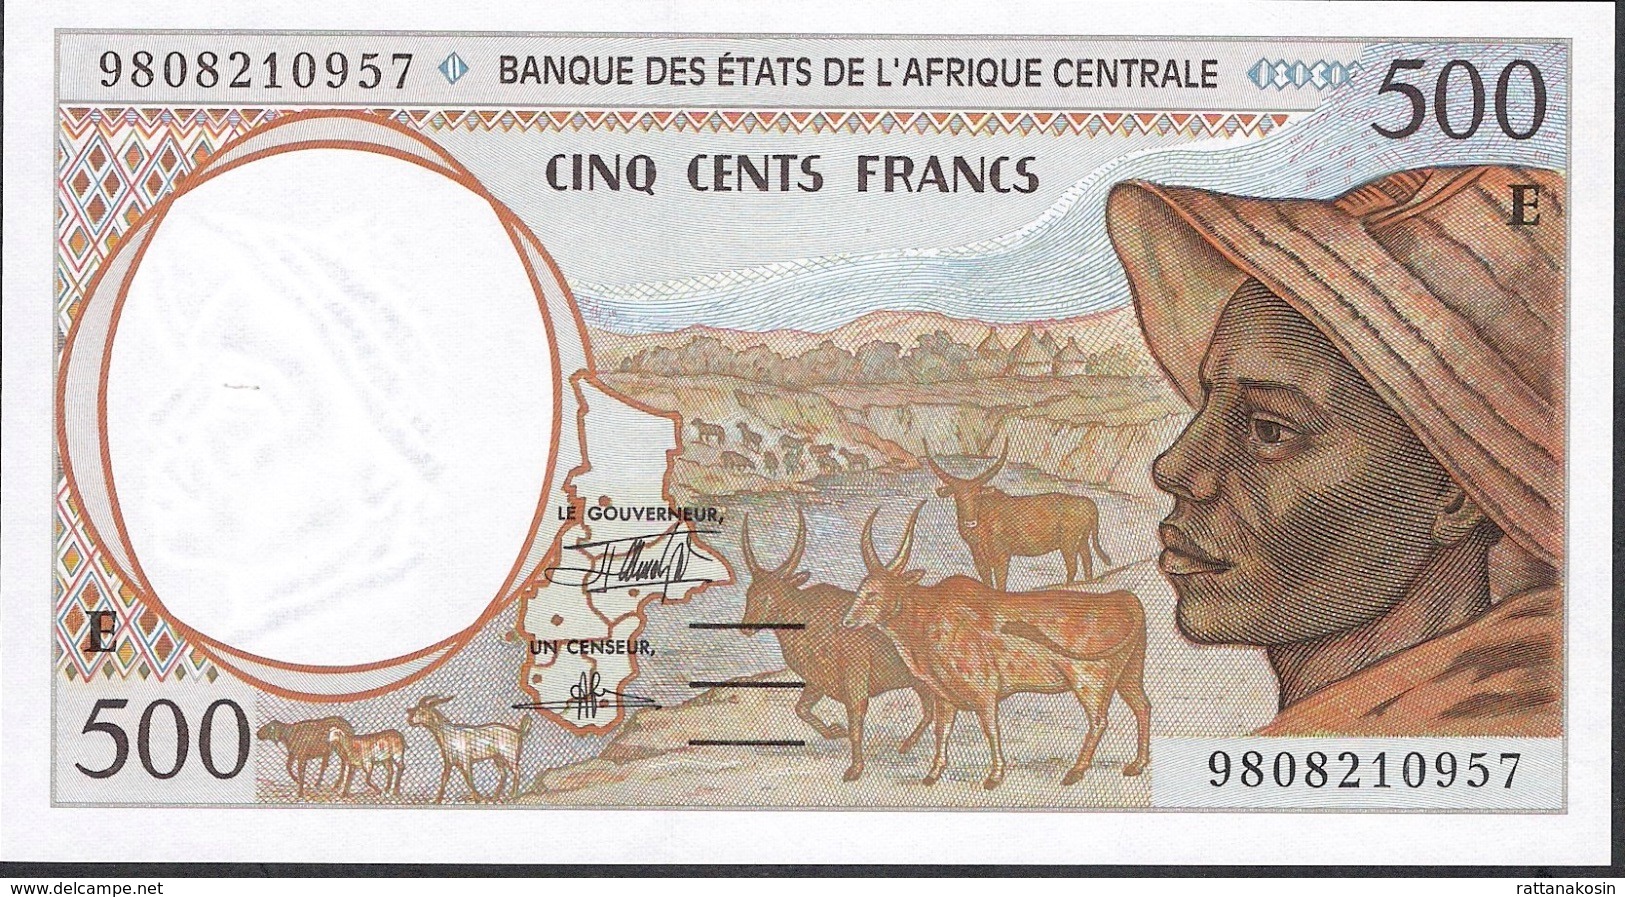 CENTRAL AFRICAN STATES Letter E P201Ee 500 FRANCS (19)98 UNC. - Stati Centrafricani